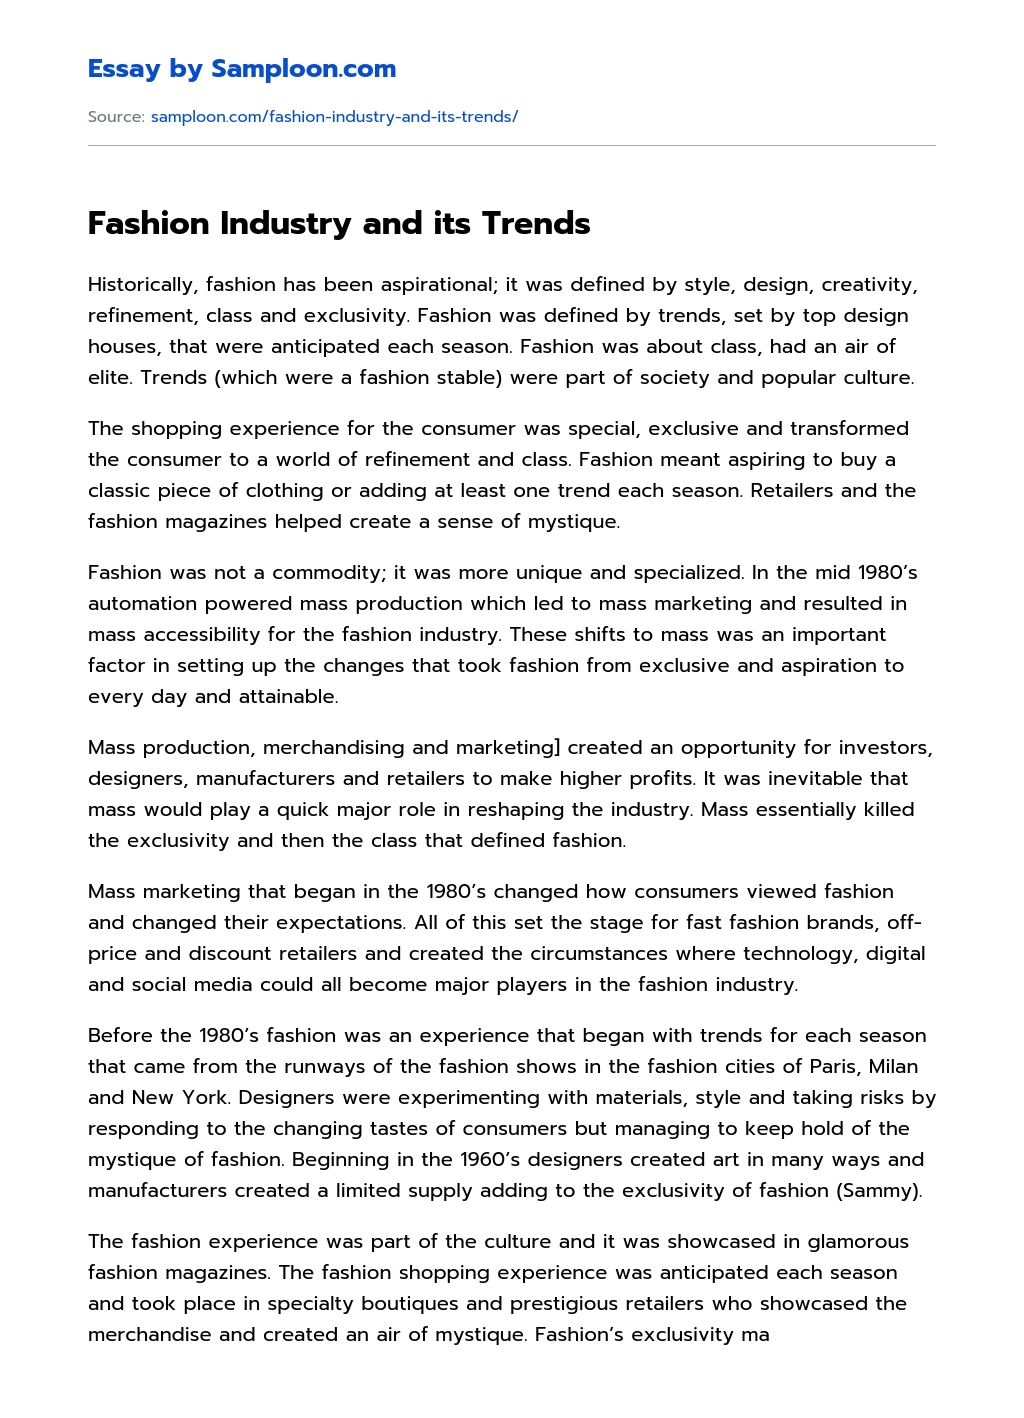 Fashion Industry and Its Trends essay